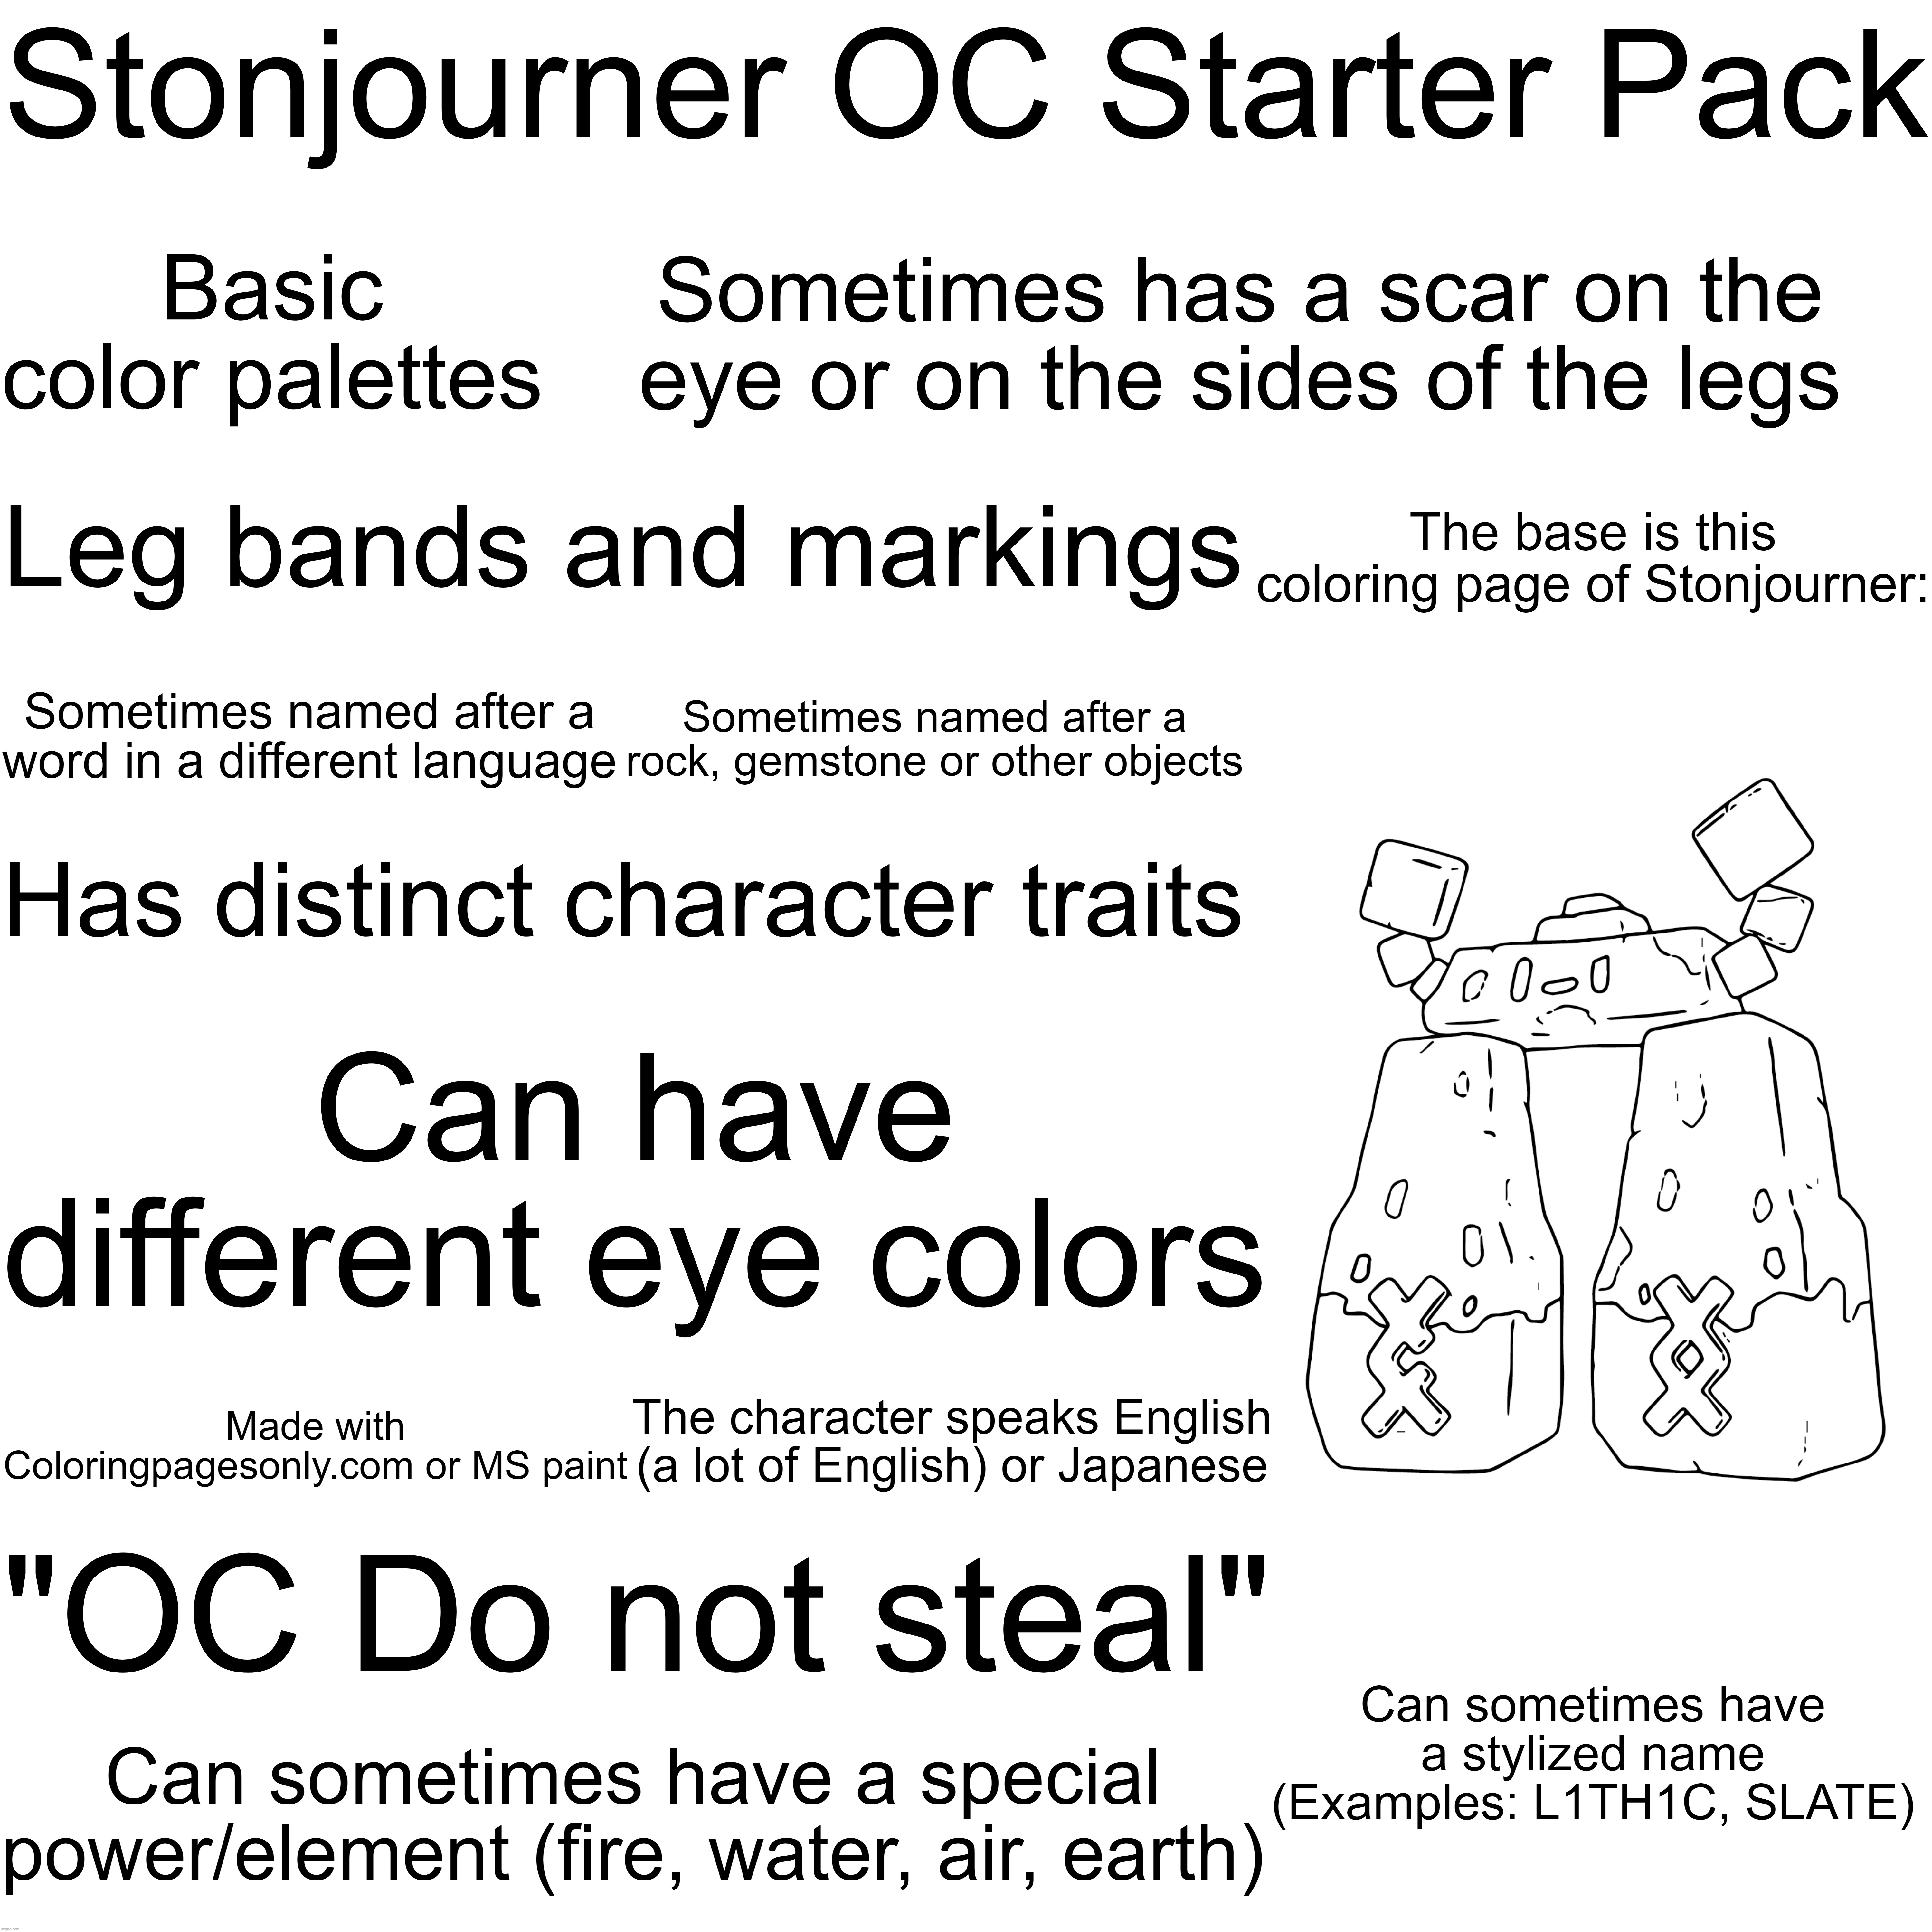 Basic stonjourner oc starter pack | Stonjourner OC Starter Pack; Basic color palettes; Sometimes has a scar on the eye or on the sides of the legs; The base is this coloring page of Stonjourner:; Leg bands and markings; Sometimes named after a word in a different language; Sometimes named after a rock, gemstone or other objects; Has distinct character traits; Can have different eye colors; The character speaks English (a lot of English) or Japanese; Made with Coloringpagesonly.com or MS paint; "OC Do not steal"; Can sometimes have a stylized name (Examples: L1TH1C, SLATE); Can sometimes have a special power/element (fire, water, air, earth) | image tagged in stonjourner,oc,starter pack | made w/ Imgflip meme maker